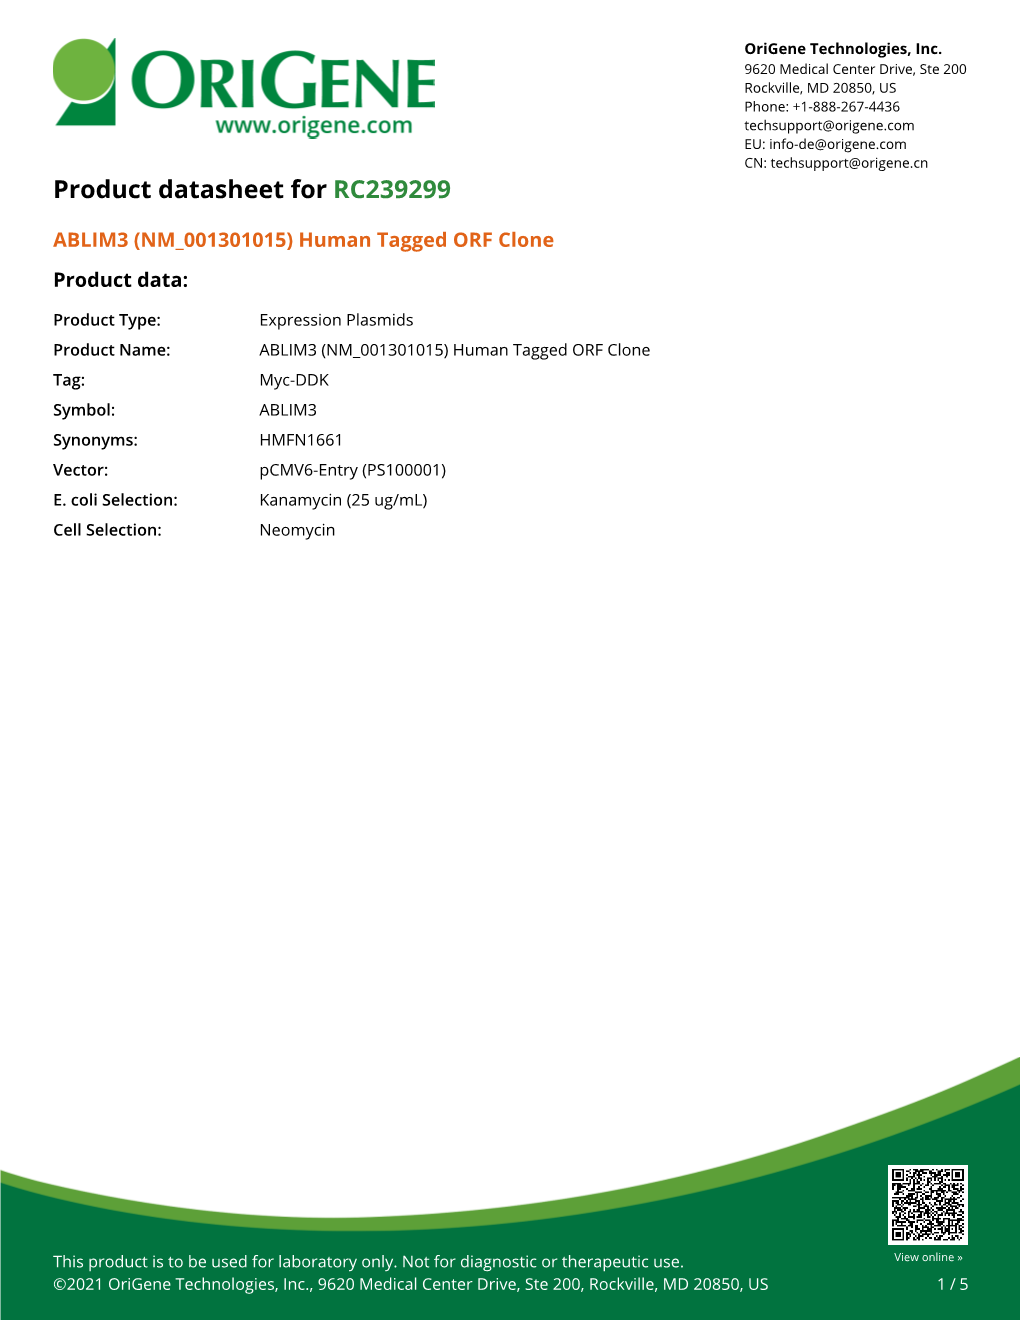 ABLIM3 (NM 001301015) Human Tagged ORF Clone Product Data